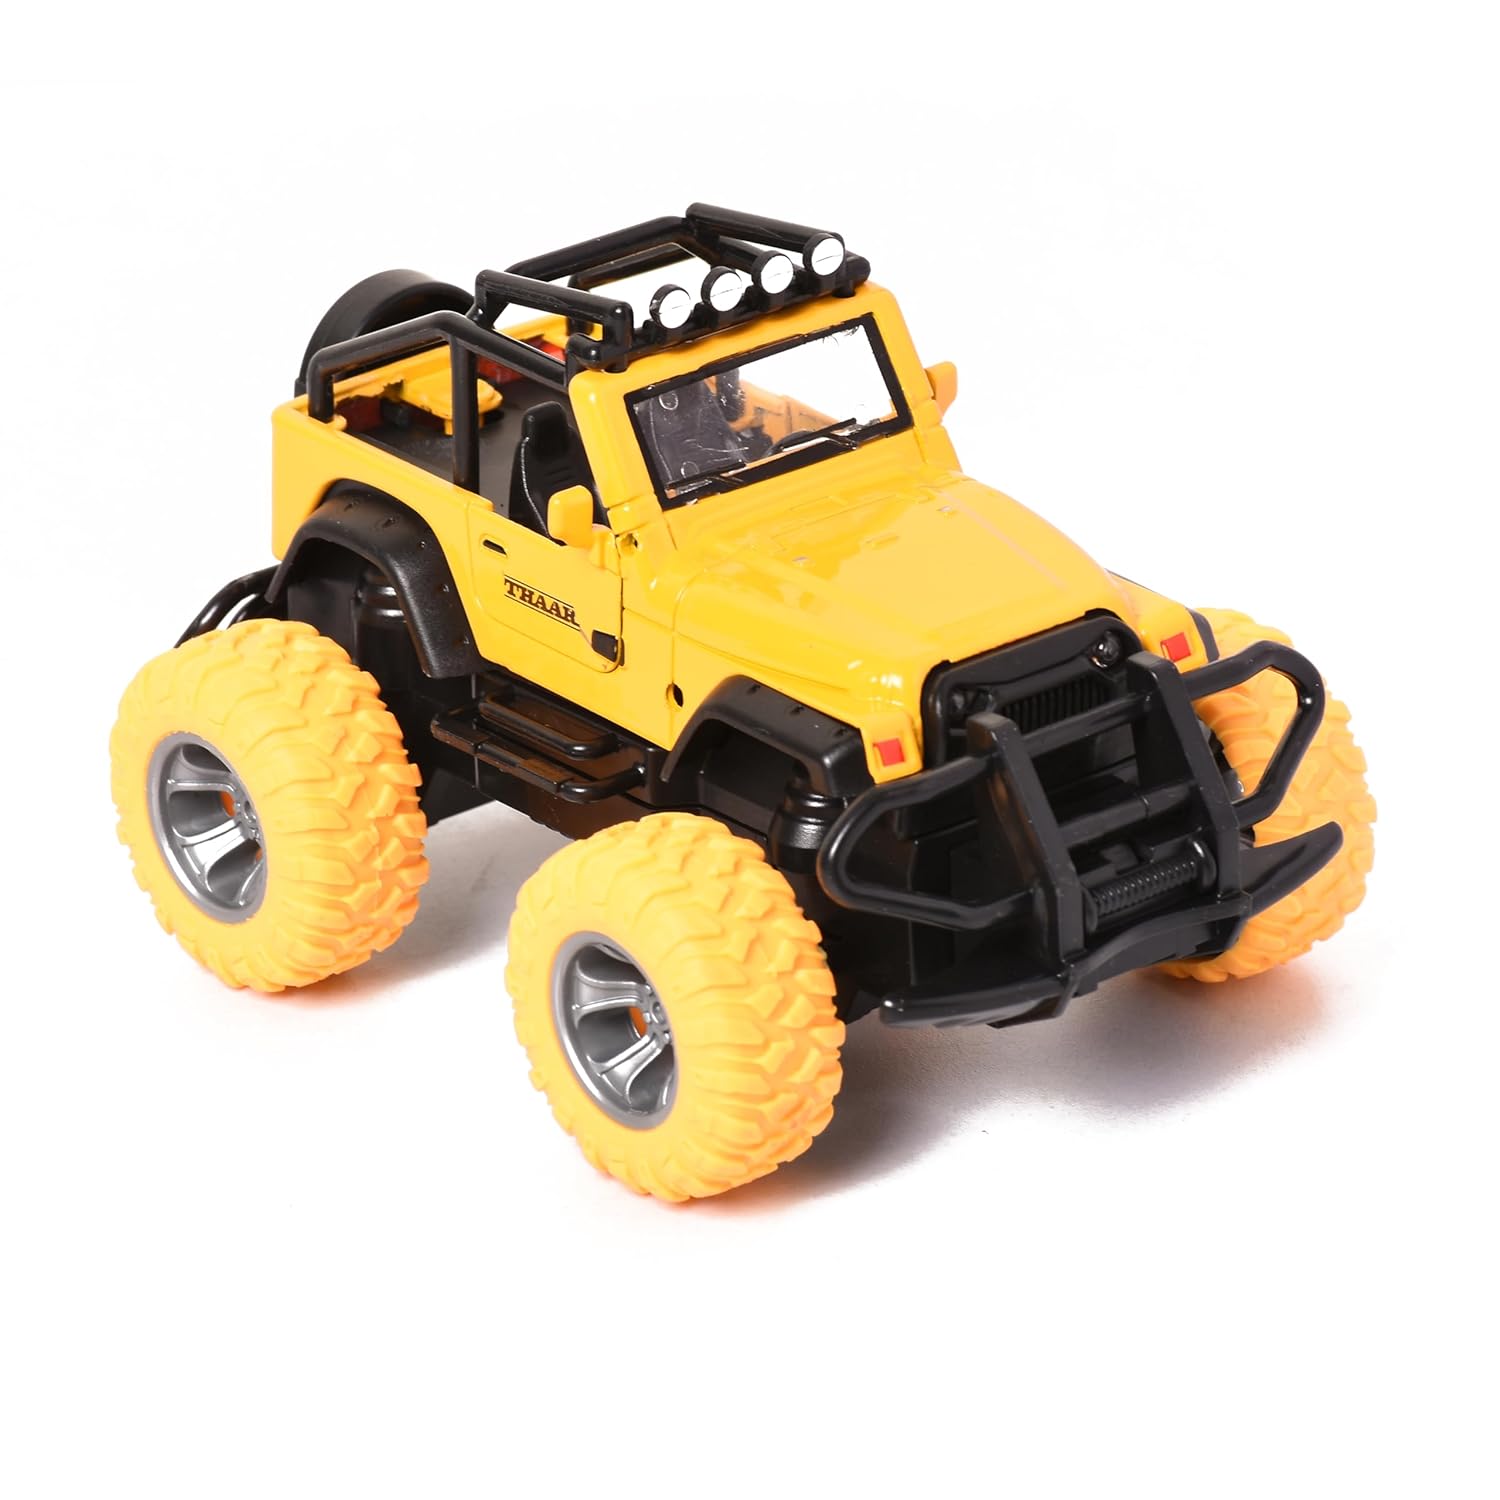 Braintastic Model Diecast Car Toy Vehicle Pull Back Friction Car with Openable Doors Light & Music Toys for Kids Age 3+ Years (Thaar Small Yellow)